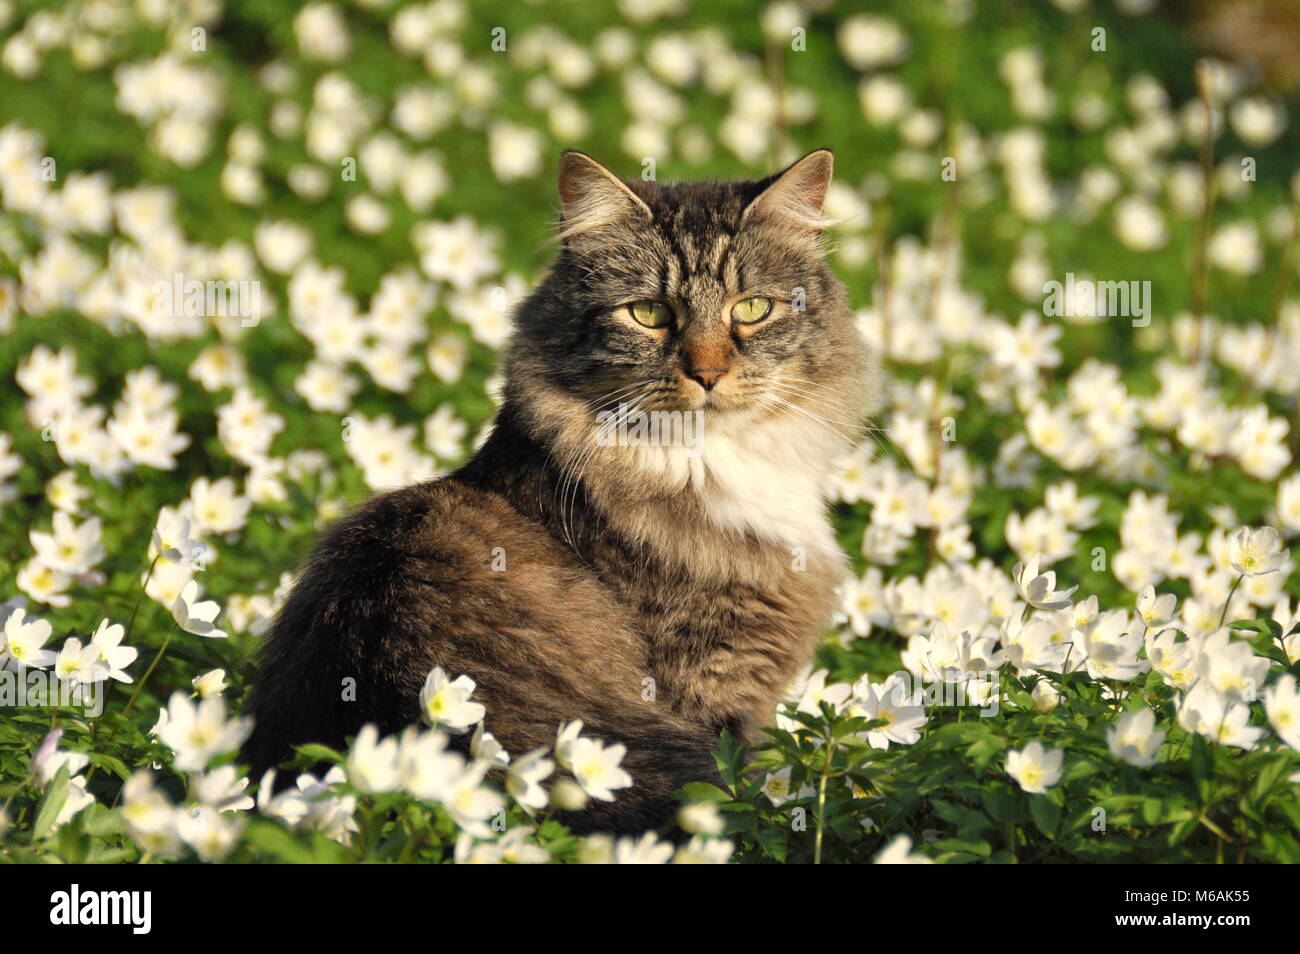 Norwegian forest cat sitting in a field of white anemone Stock Photo